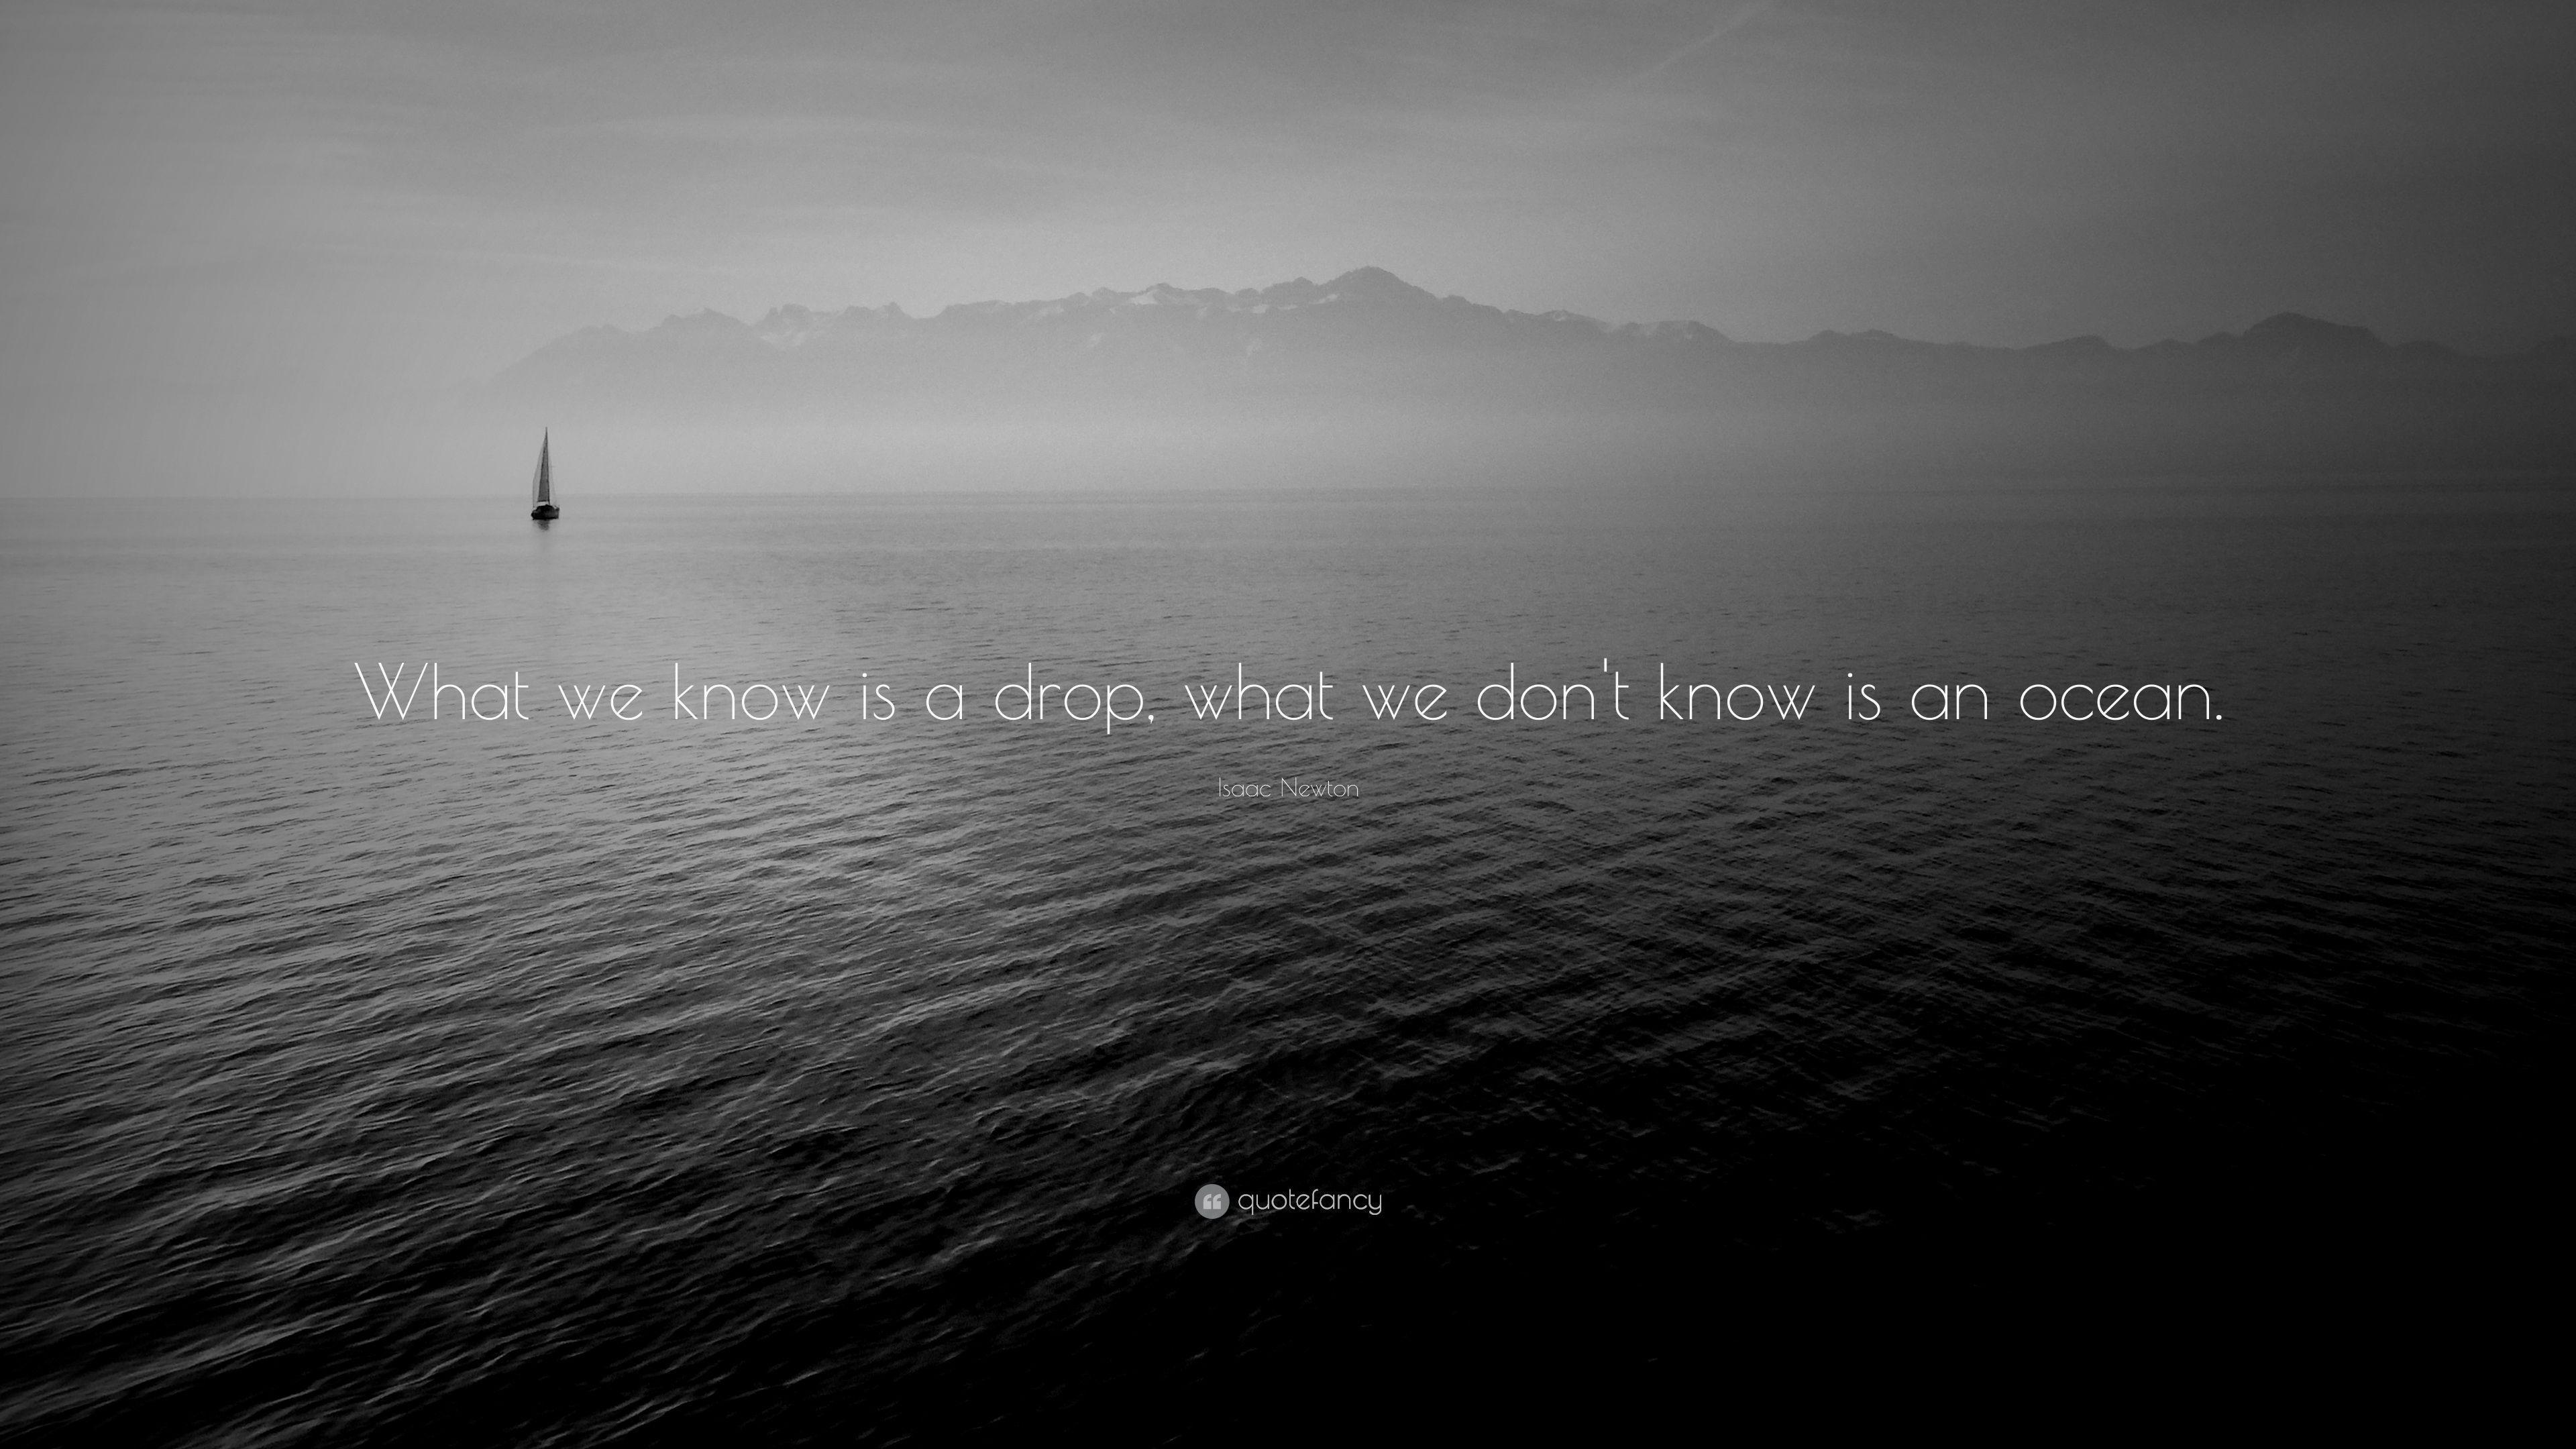 Isaac Newton Quote: “What we know is a drop, what we don't know is